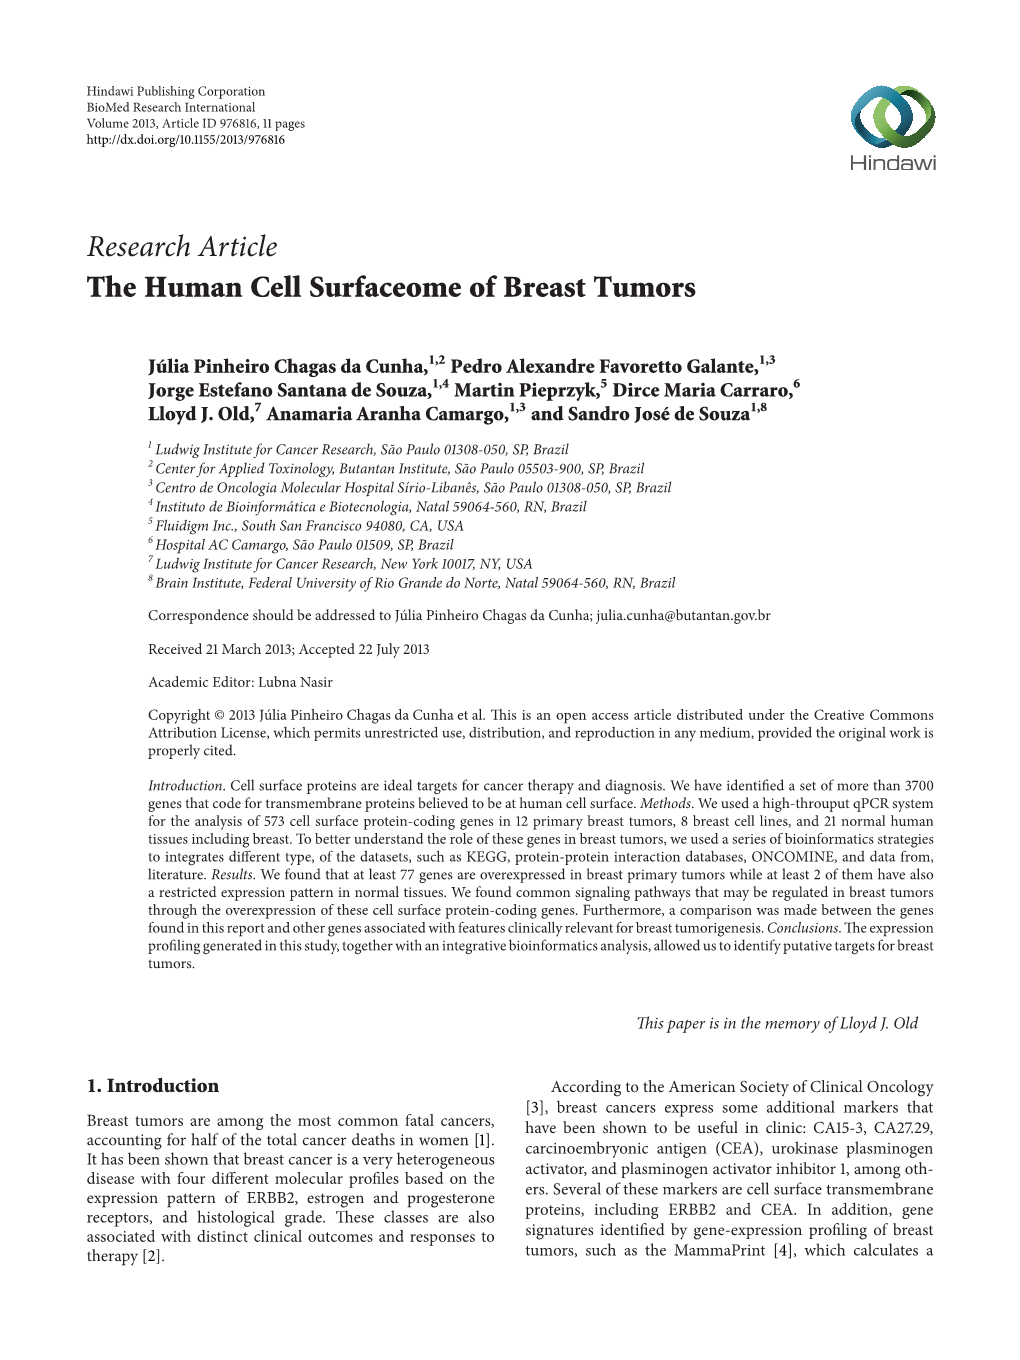 The Human Cell Surfaceome of Breast Tumors